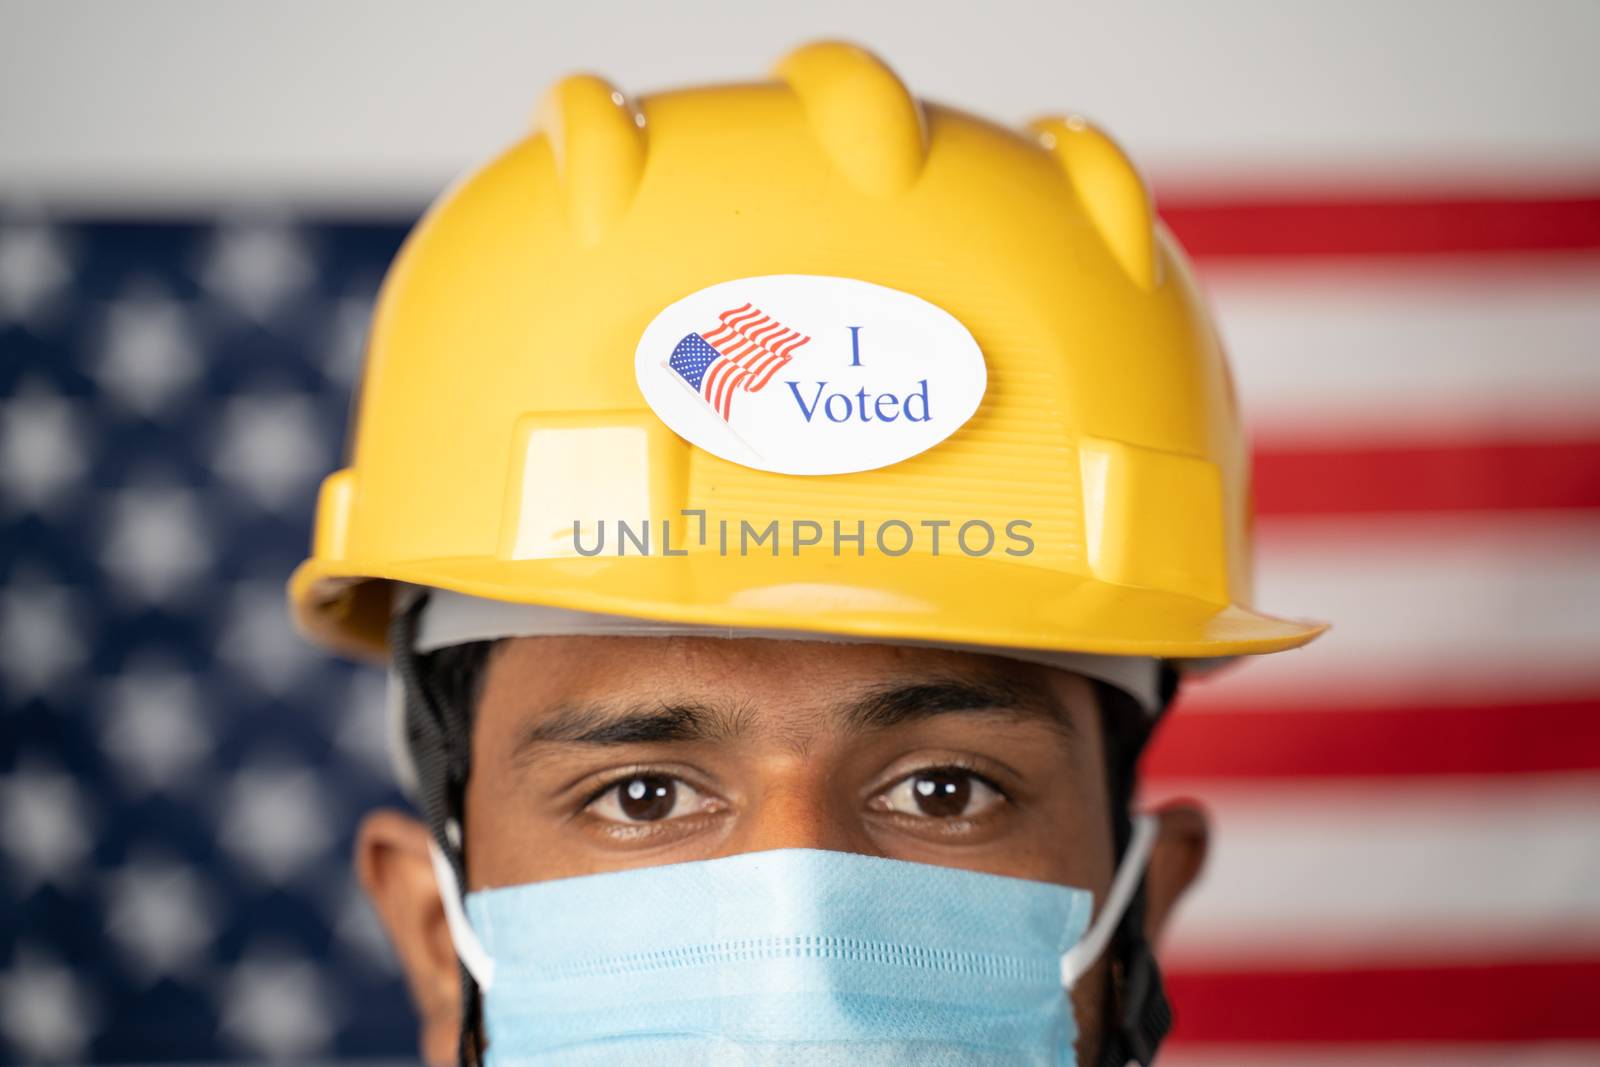 Close up of I voted sticker on worker hardhat with US flag as background - Concept of USA elections and voting. by lakshmiprasad.maski@gmai.com